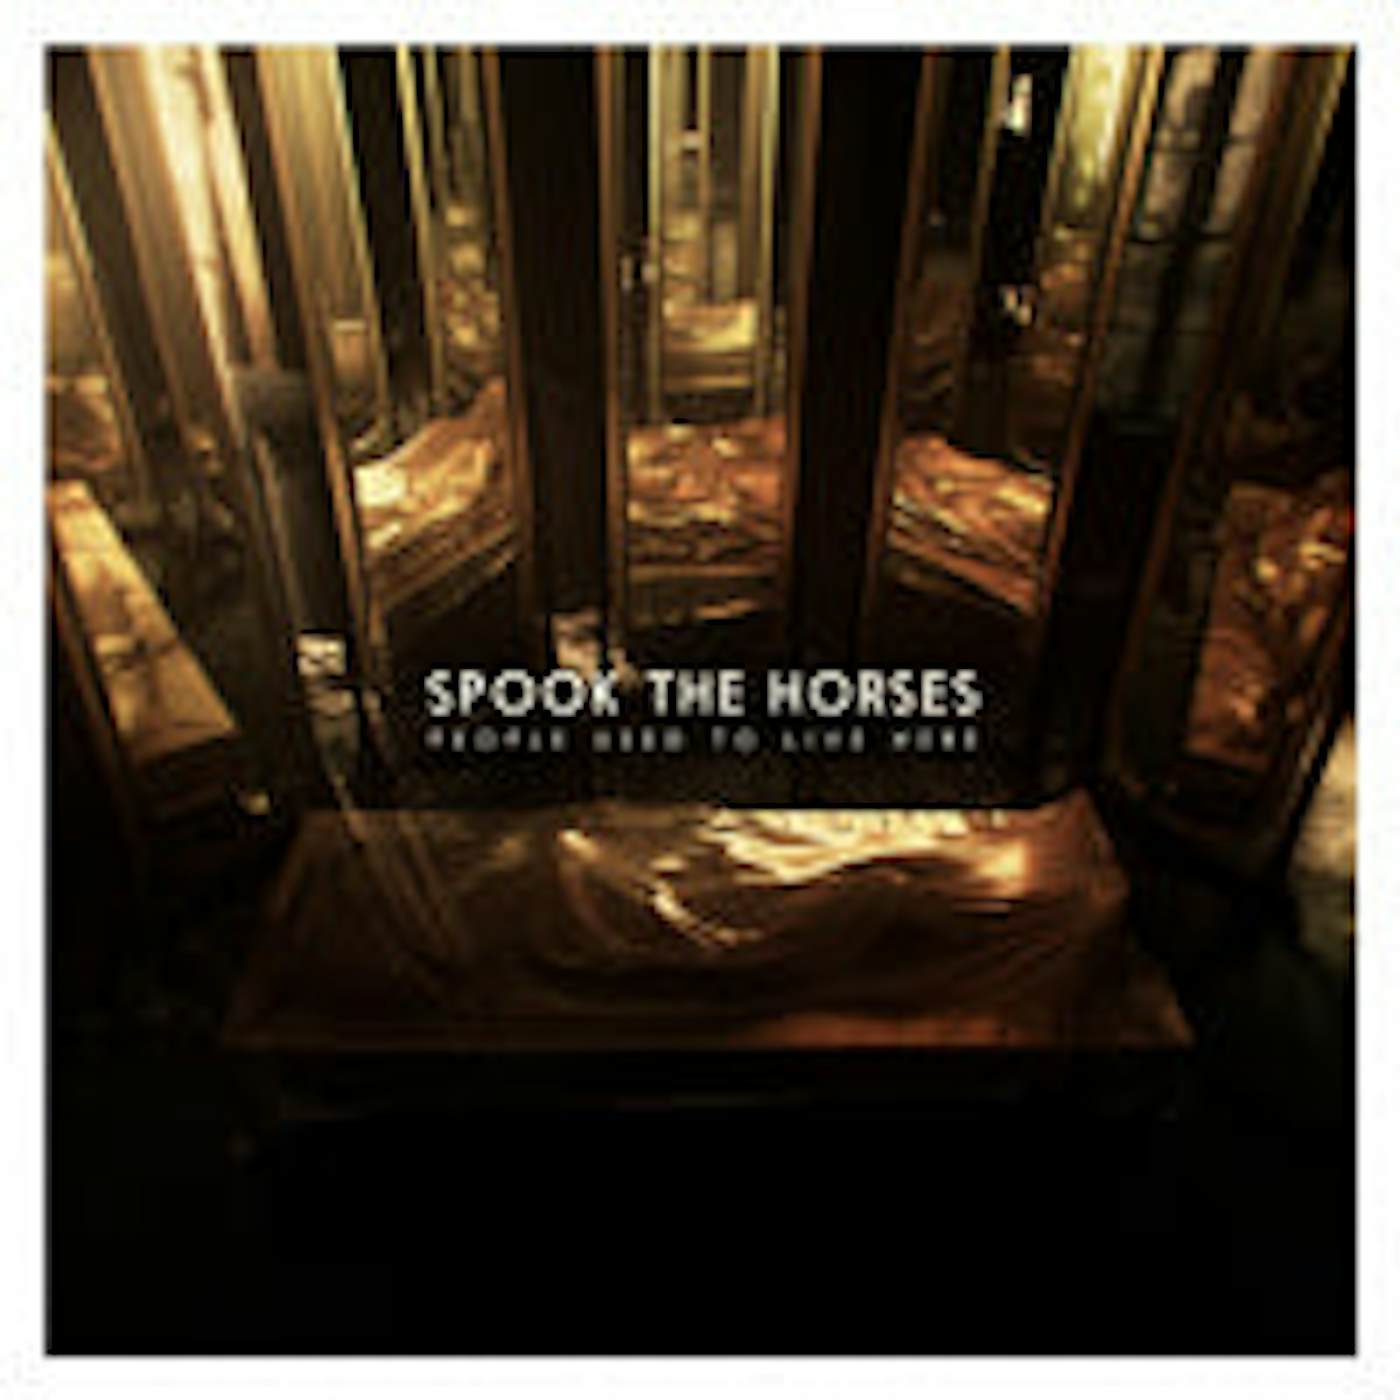 Spook The Horses LP - People Used To Live Here (Vinyl)